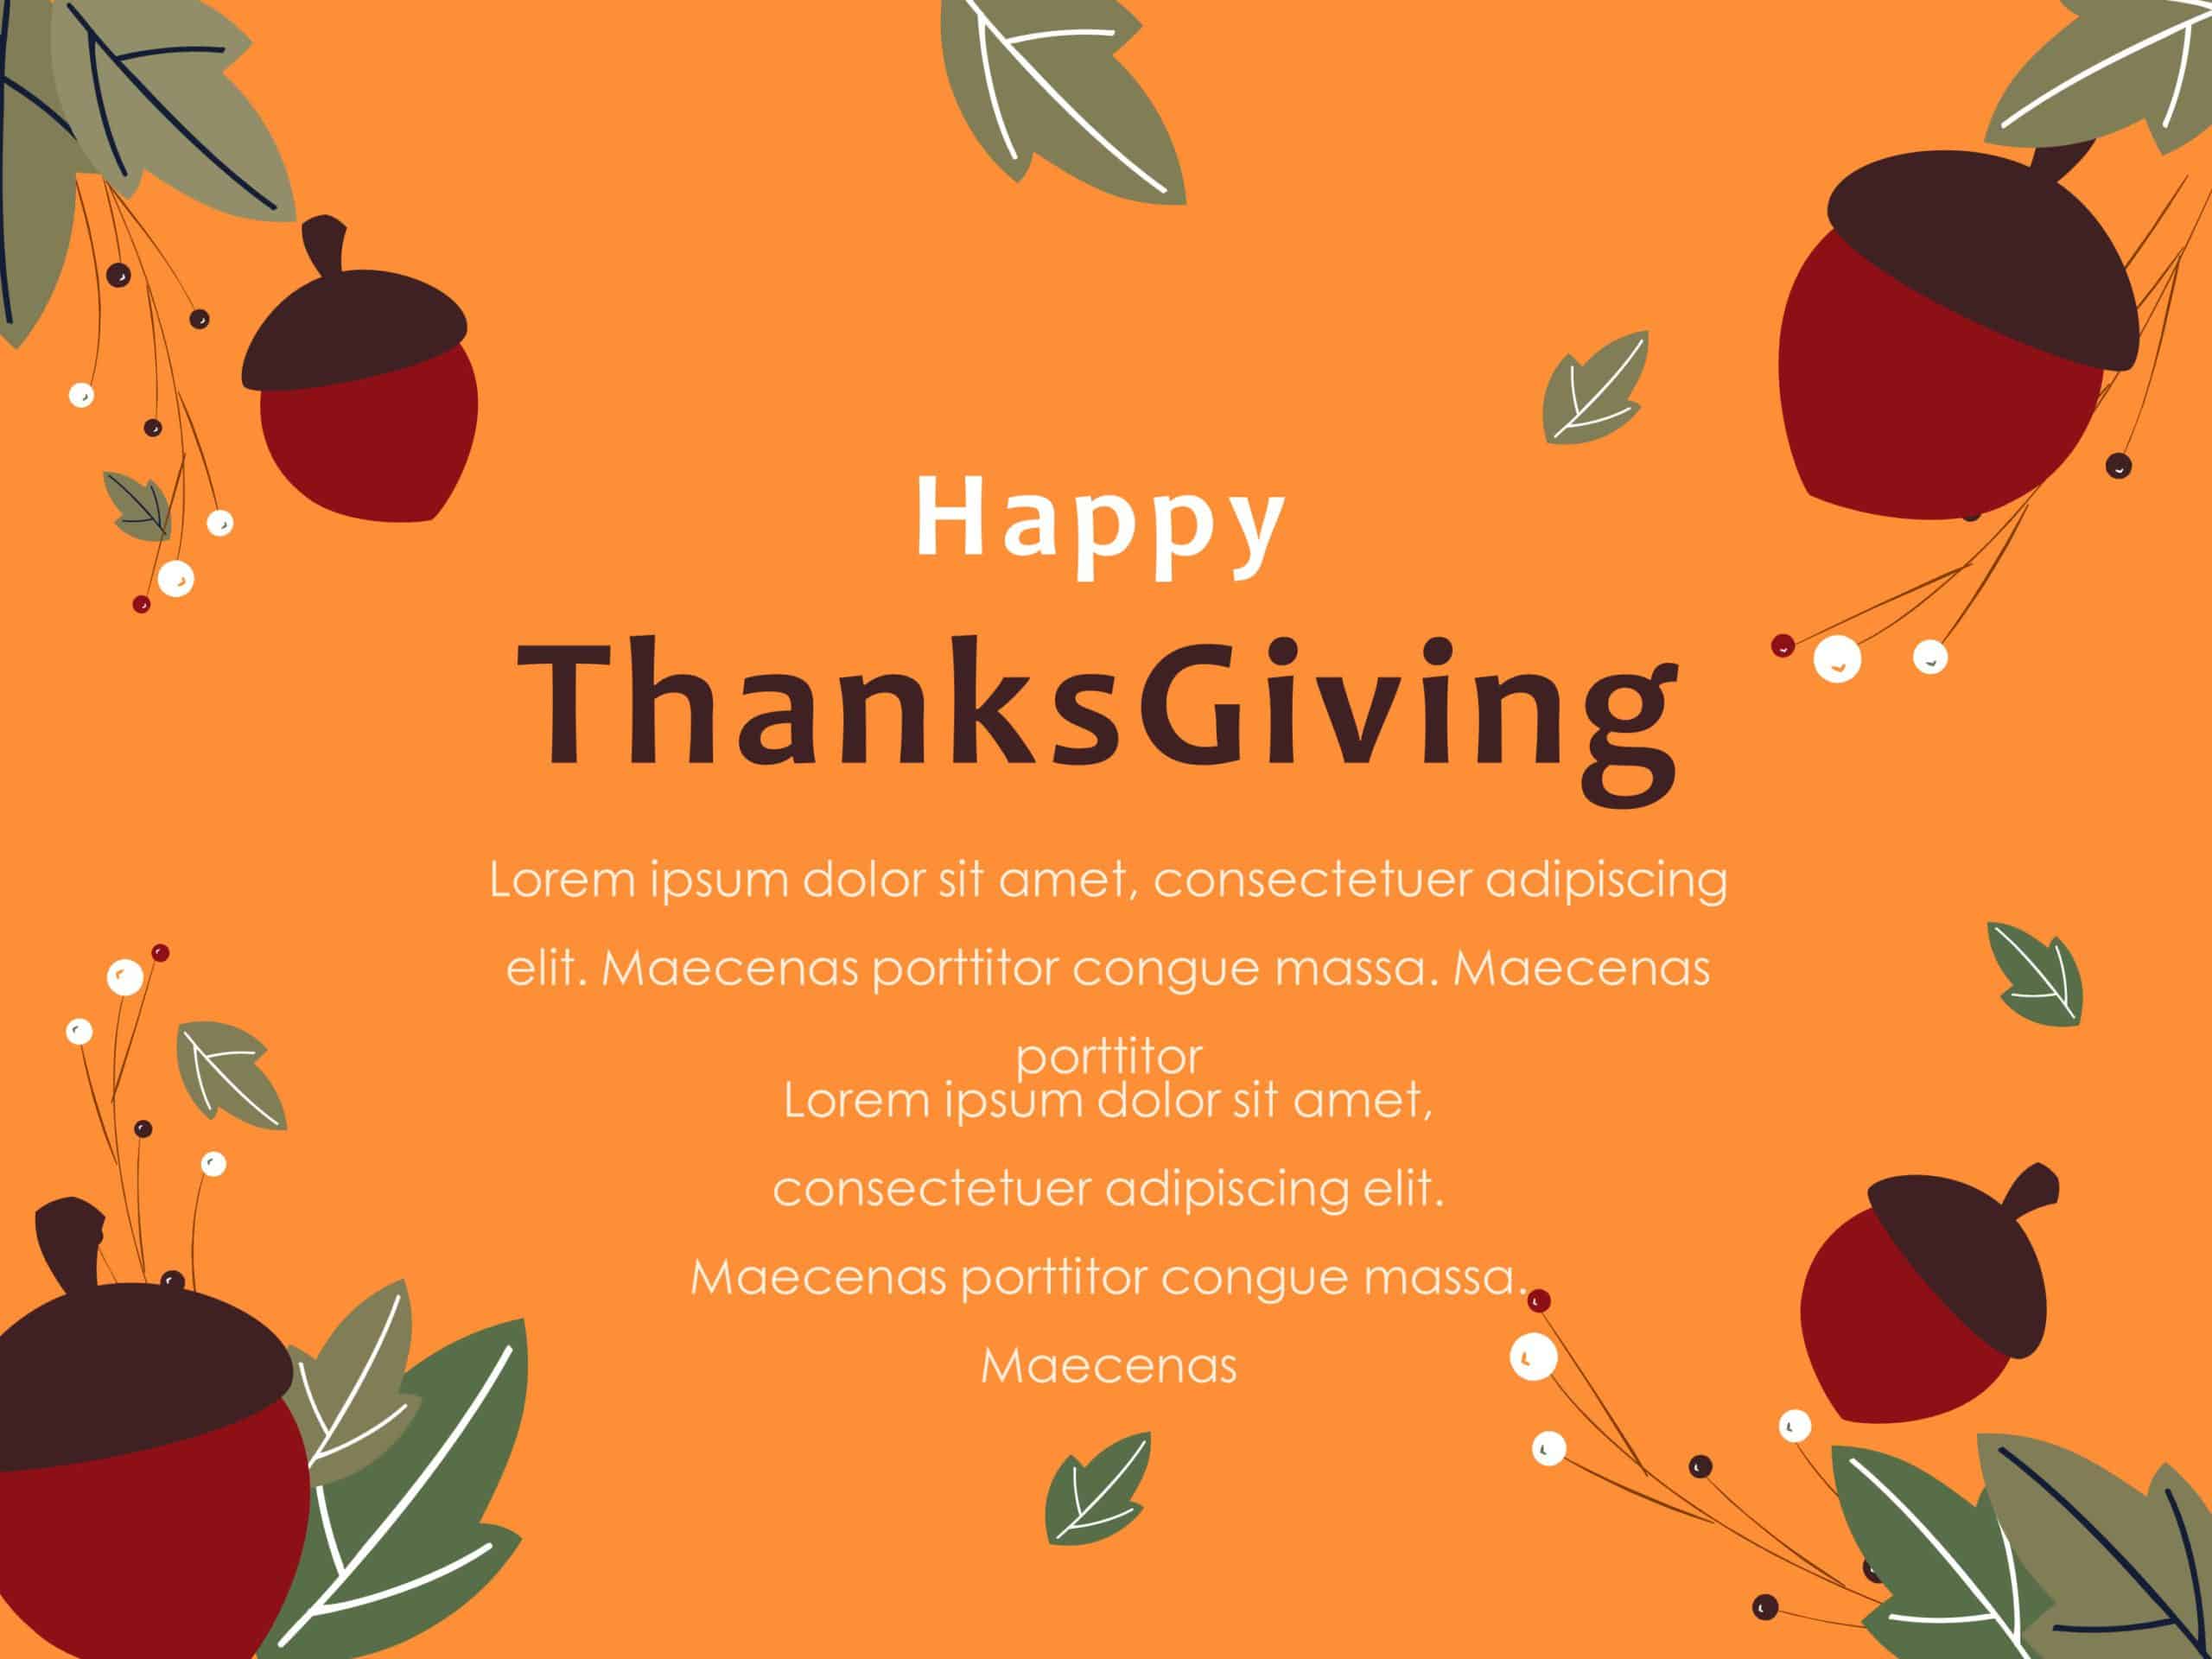 Happy Thanksgiving Greeting PowerPoint Template